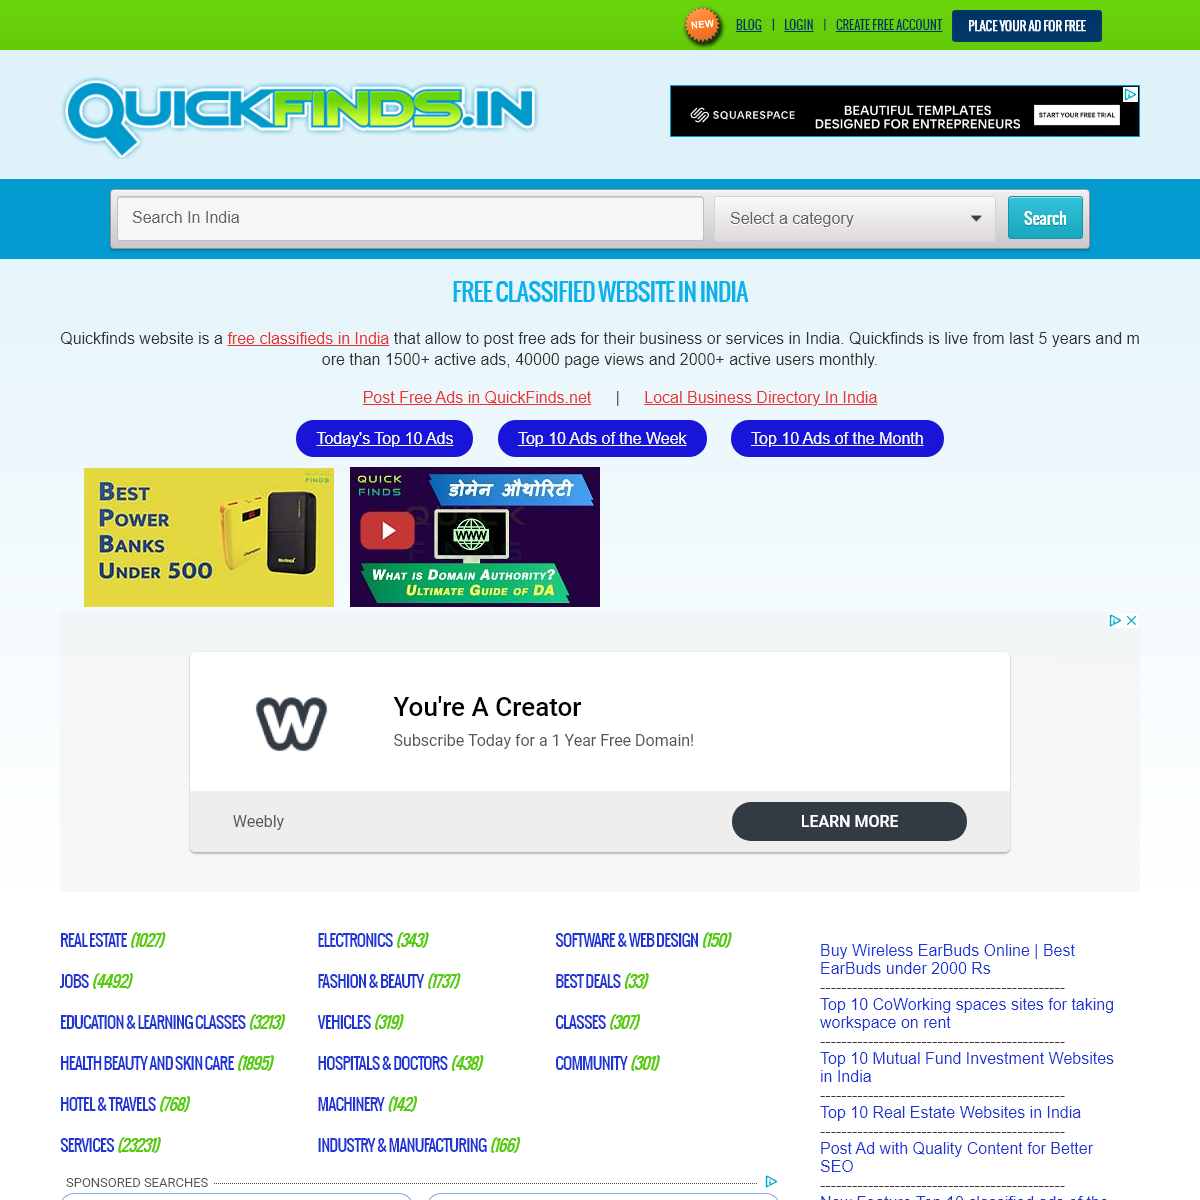 A complete backup of quickfinds.in